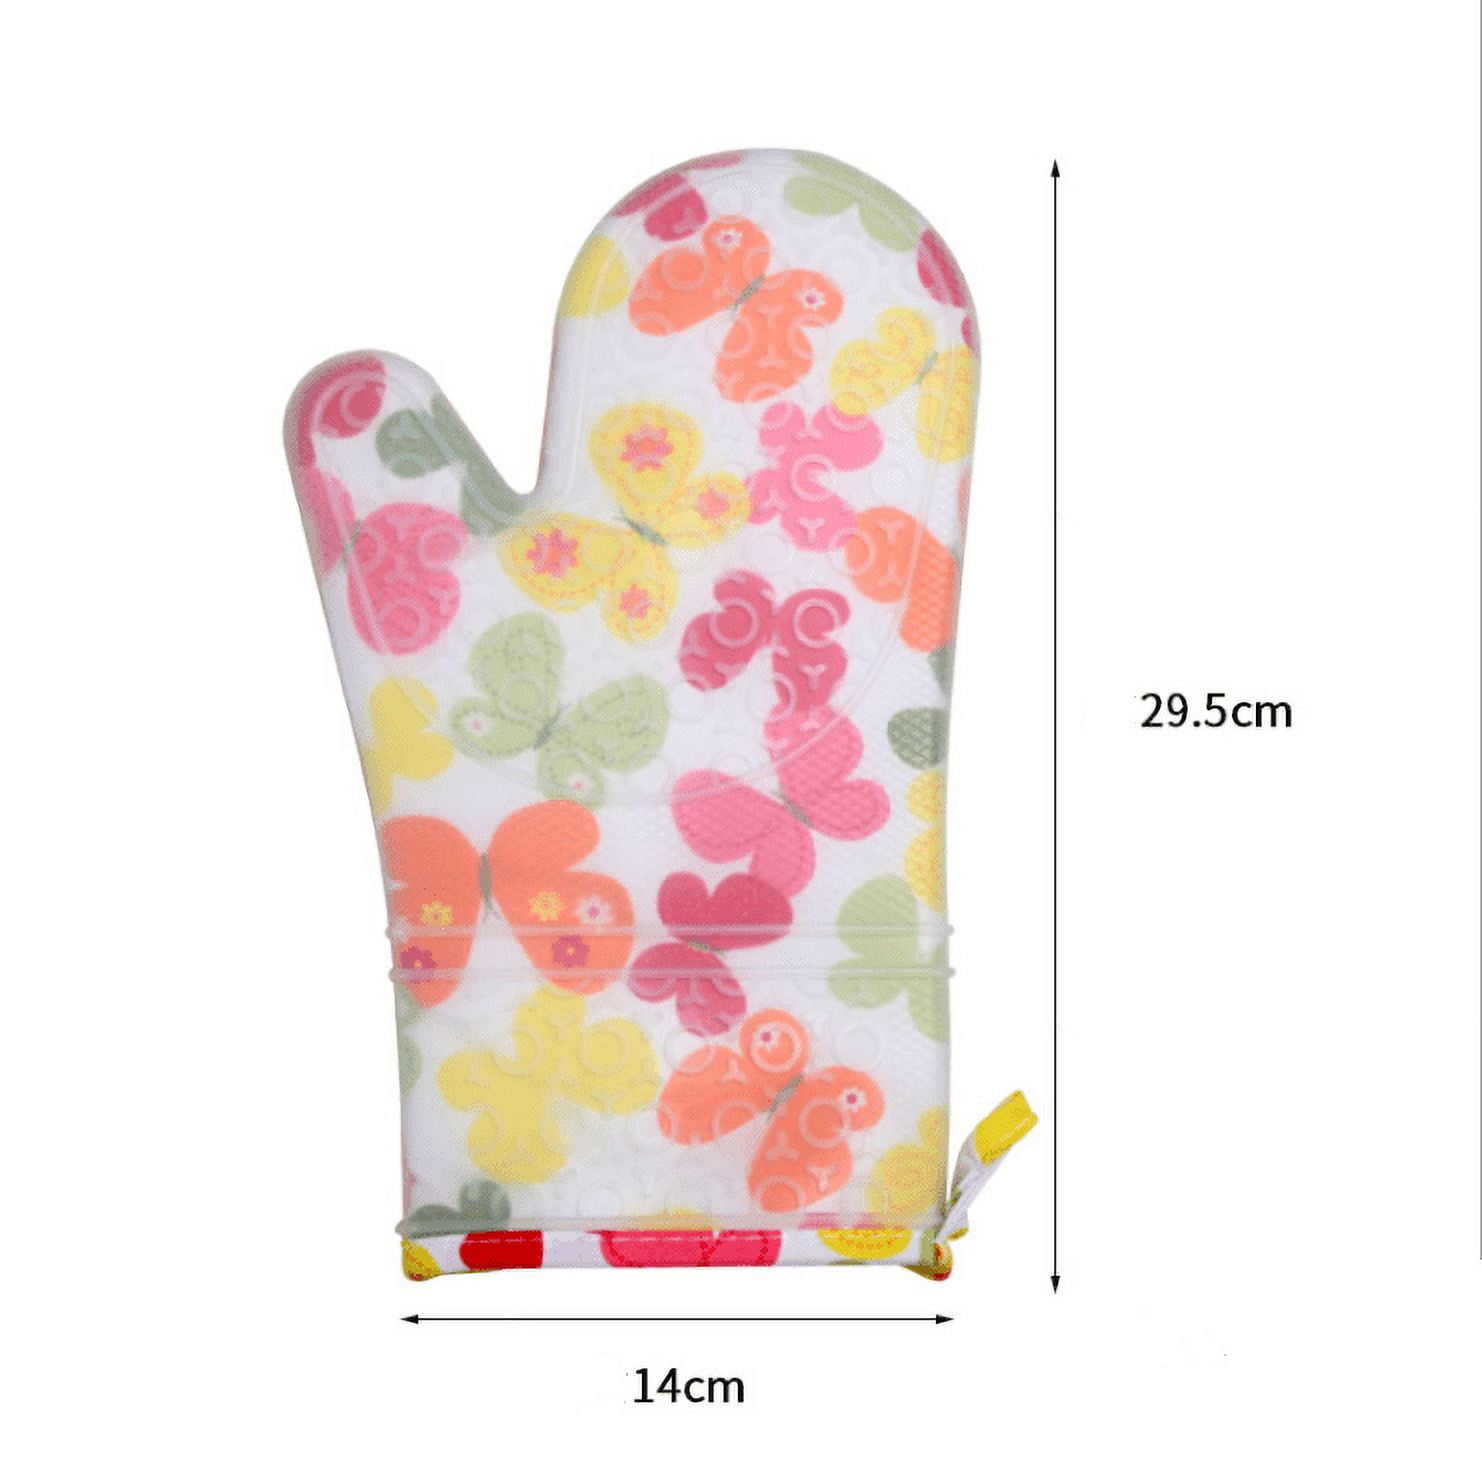 IXO 6Pcs Oven Mitts and Pot Holders, 500℉ Heat Resistant Oven Mitts with  Kitchen Towels Soft Cotton Lining and Non-Slip Silicone Surface Safe for